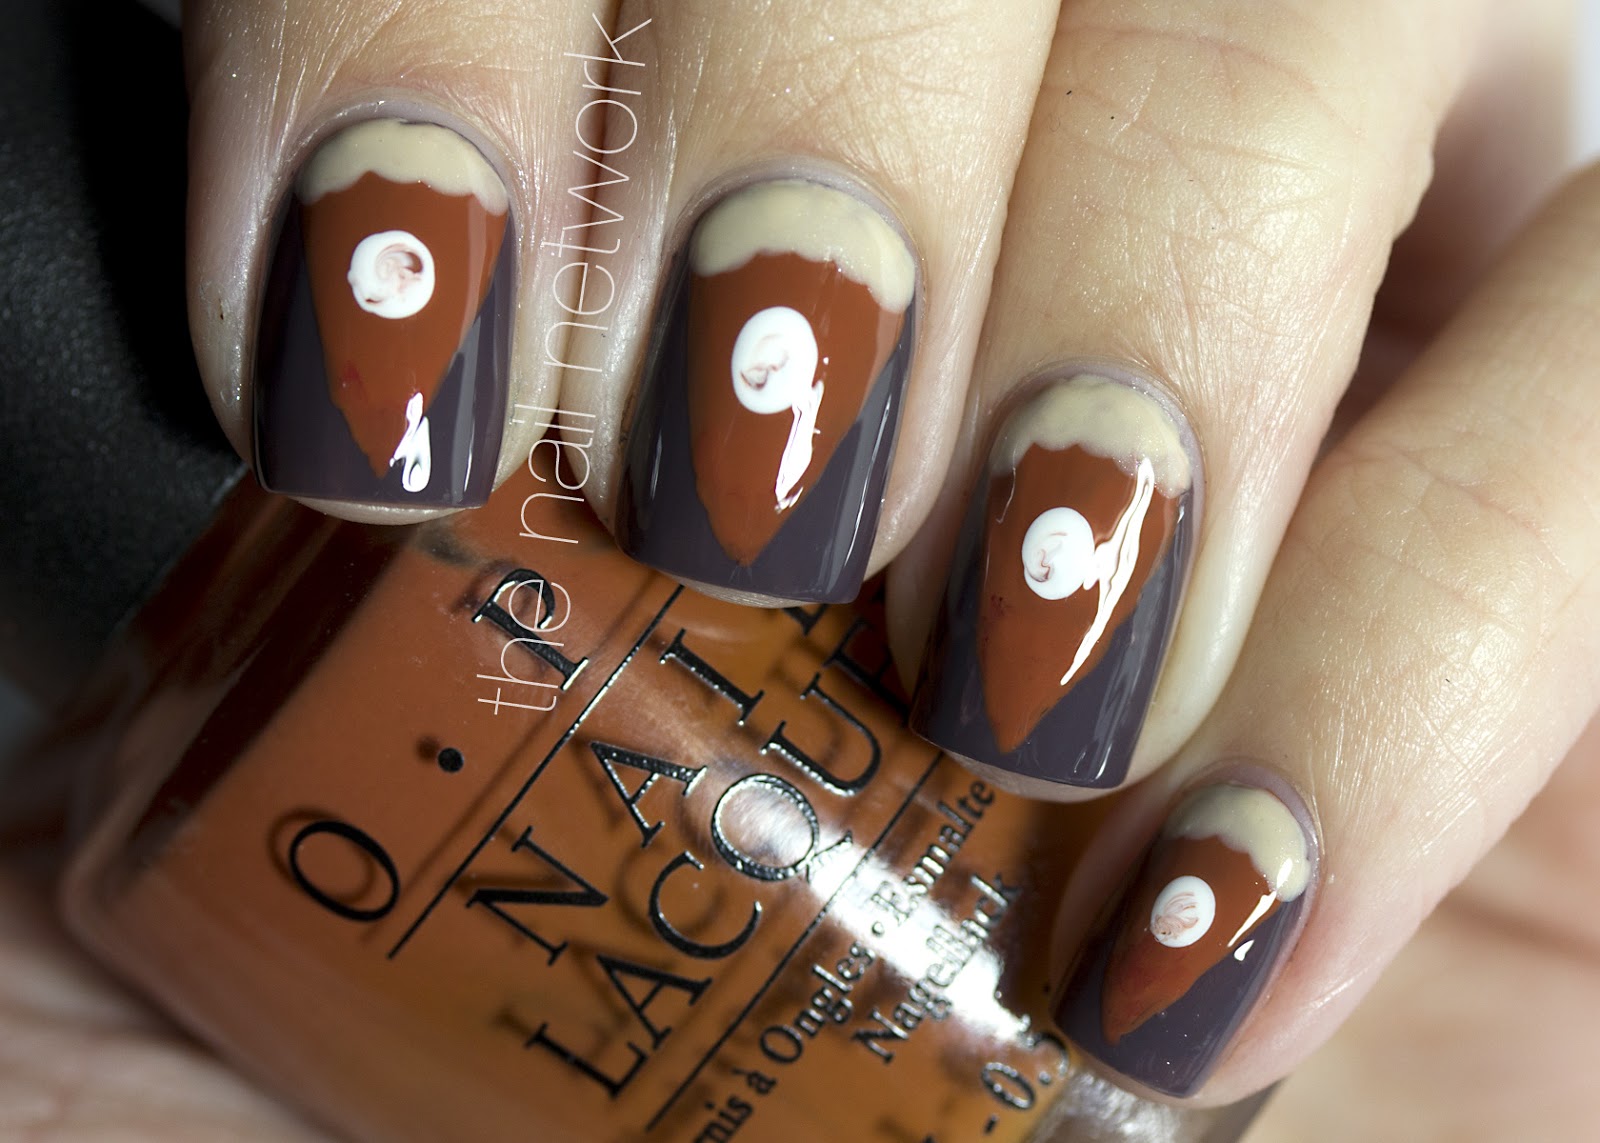 13 Of The Best Thanksgiving Nail Designs You Will Love To Copy ...